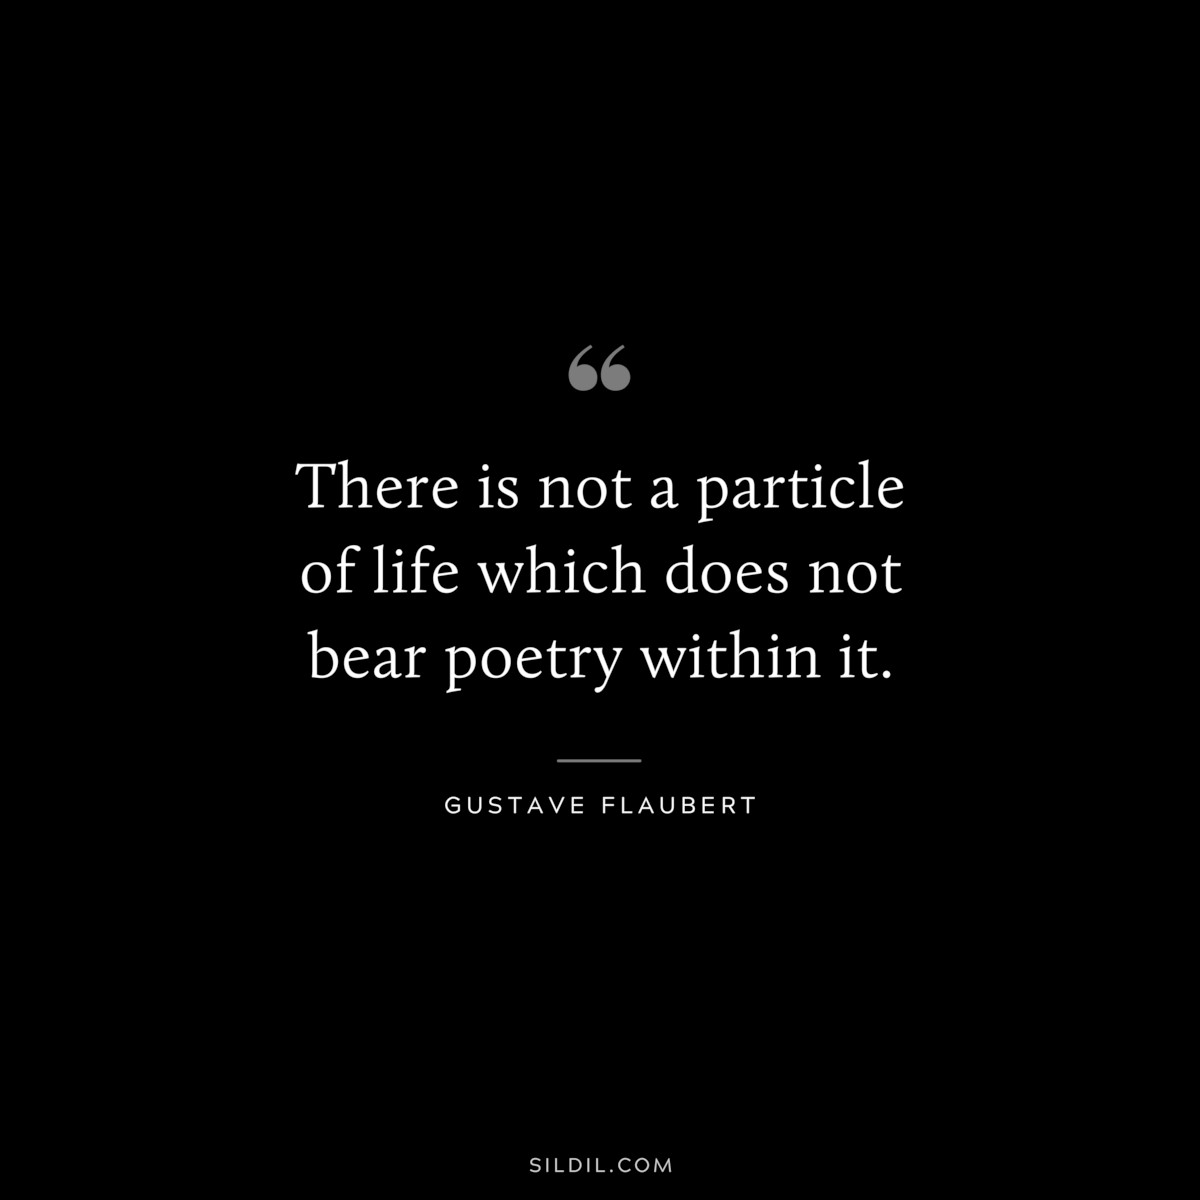 There is not a particle of life which does not bear poetry within it. ― Gustave Flaubert